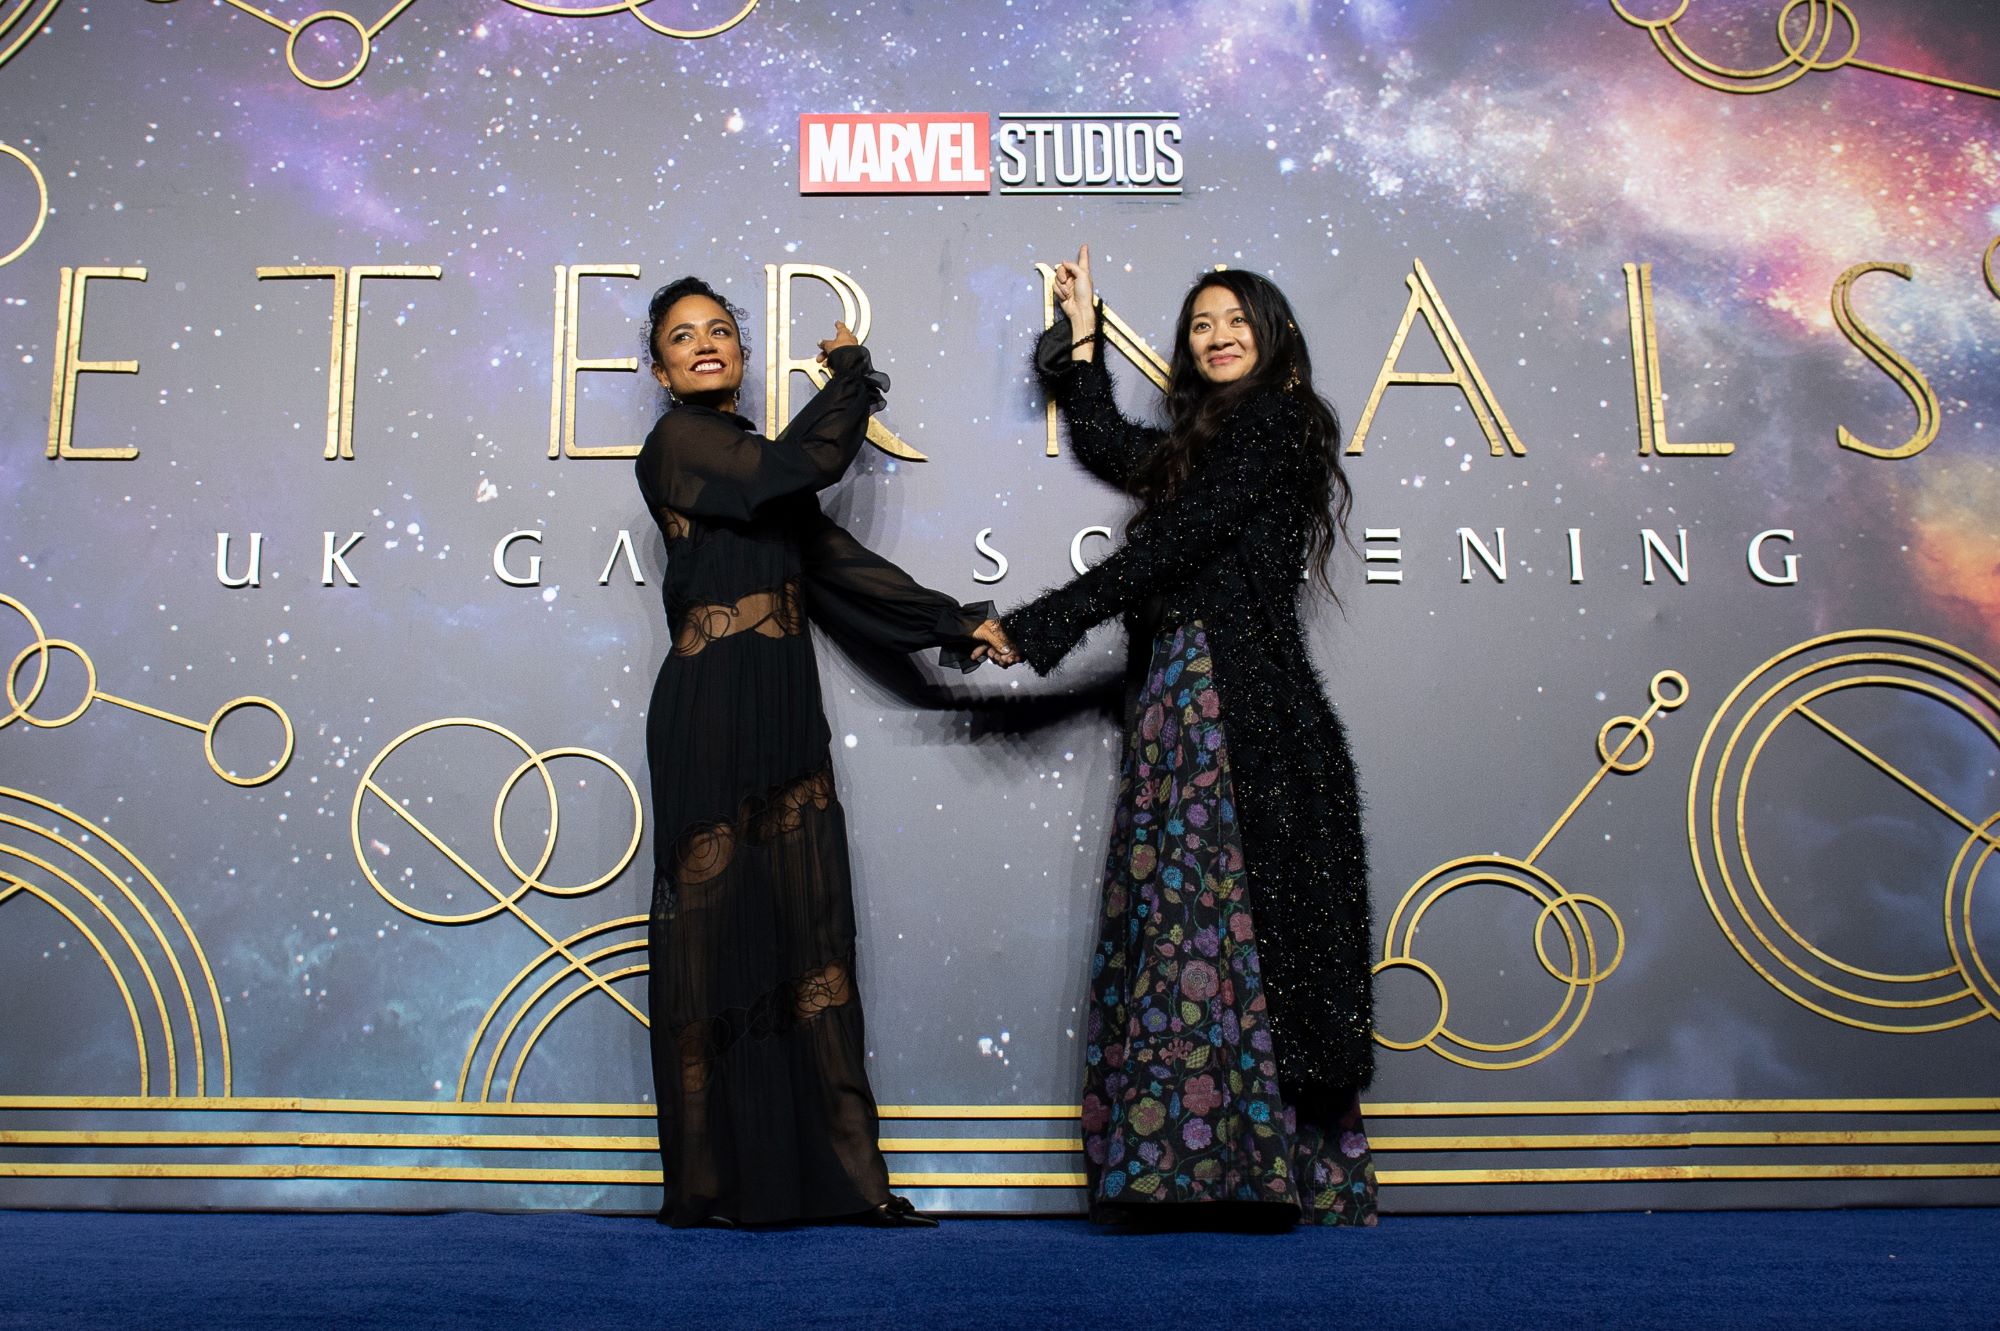 Marvel's 'Eternals' star Lauren Ridloff and director Chloé Zhao point at the wall behind them that says 'Marvel Studios Eternals UK Gala Screening,' and they hold hands. Ridloff wears a black dress with long sleeves. Zhao wears a floral dress with a long black cardigan. Will 'Eternals' get a sequel?